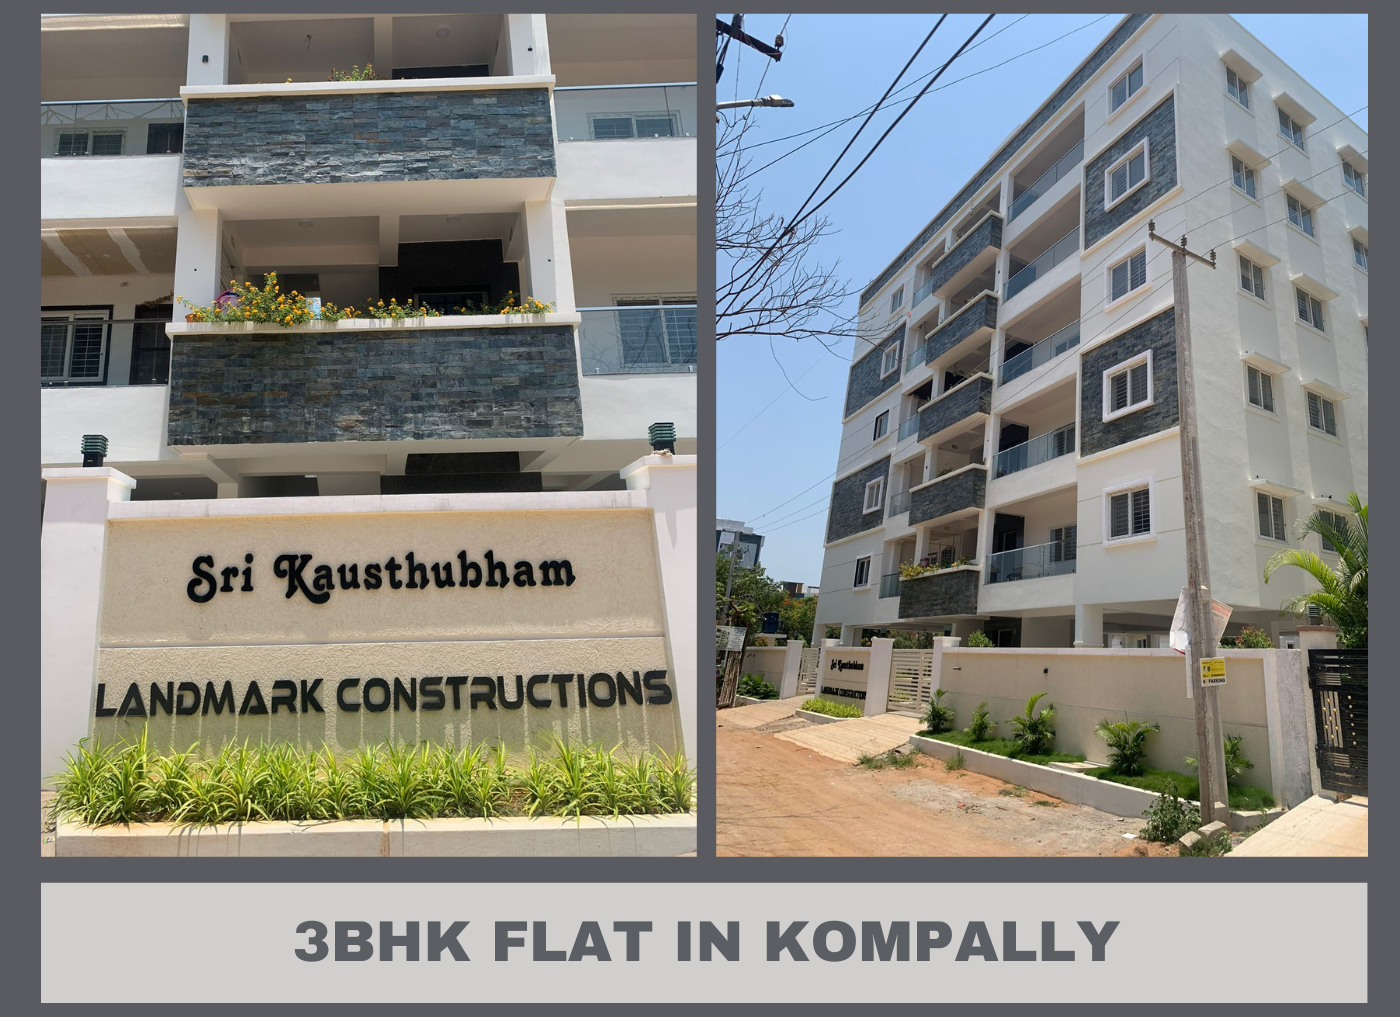 3BHK Deluxe Flat for Sale in Kompally Jayabheri Park, East-Facing, Ready to Occupy